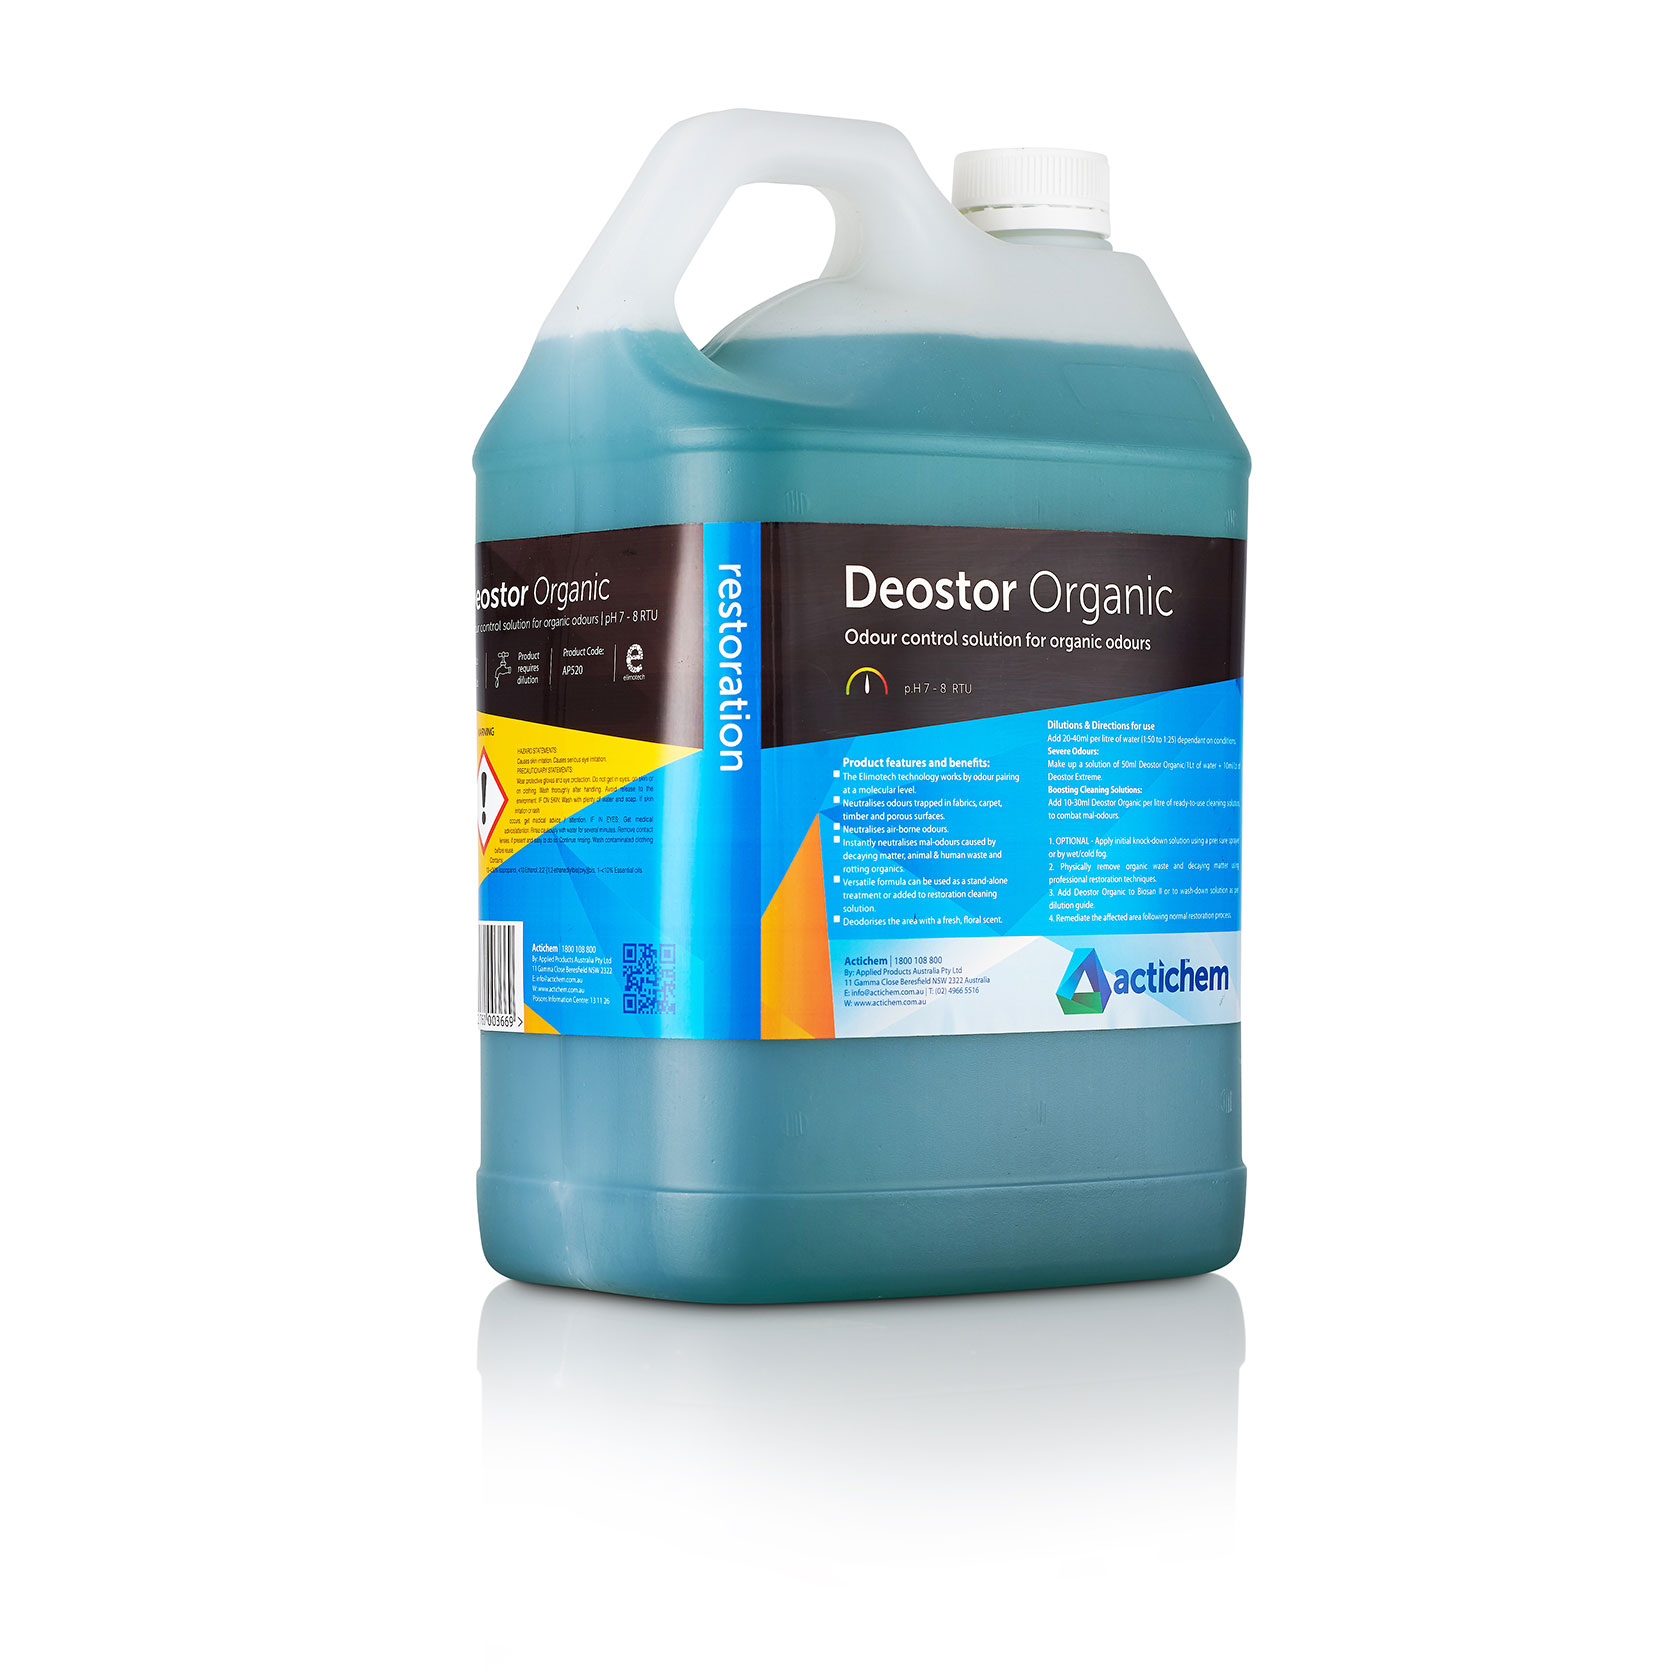 Actichem Deostor Organic Enzyme based odour control product for organic waste